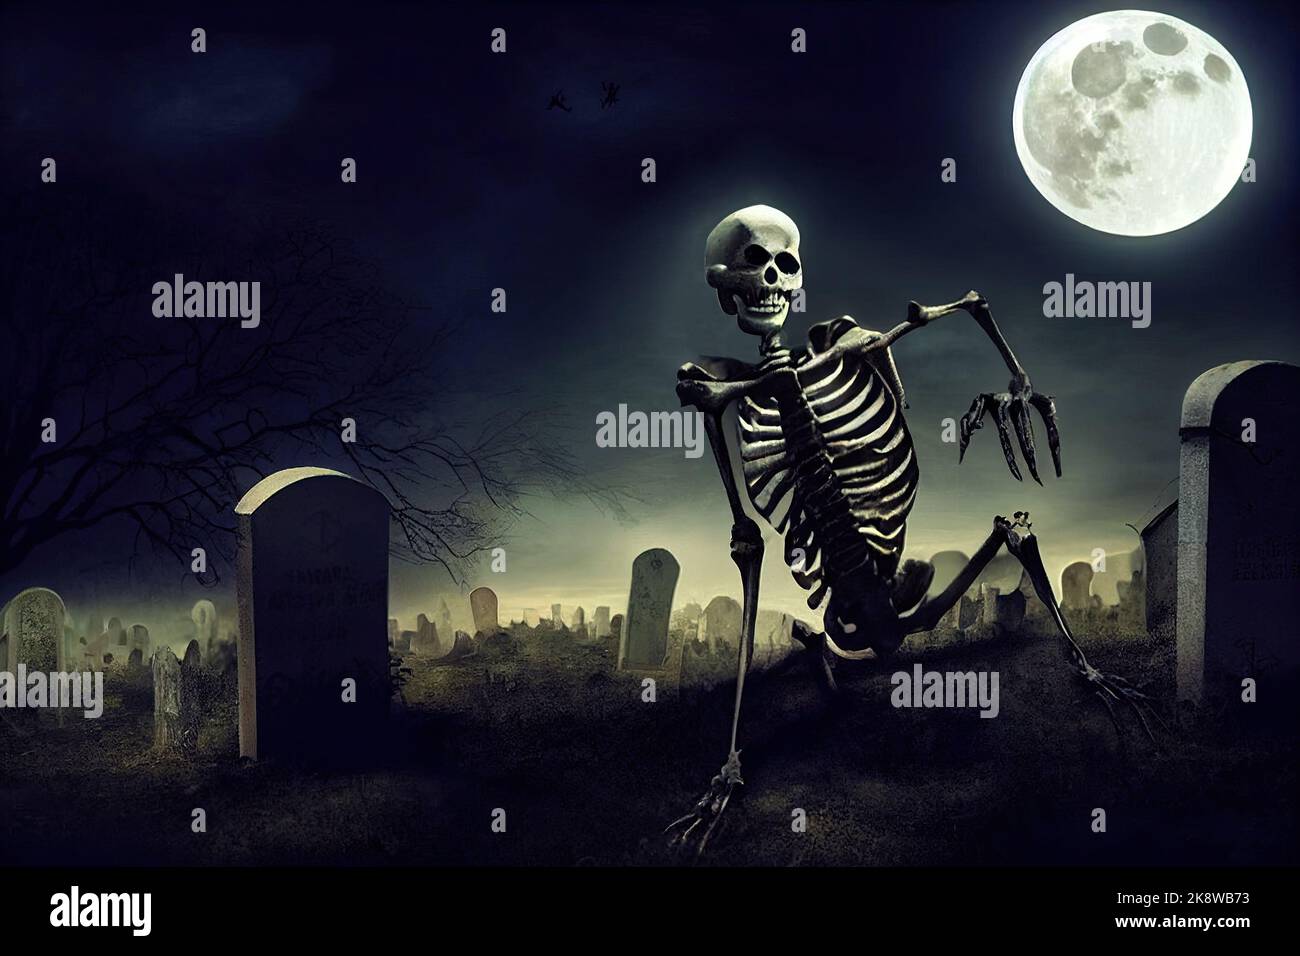 A graveyard filled with zombie skeleton illuminated by the full moon on Halloween night. A fantasy horror description. 3D illustration. Stock Photo